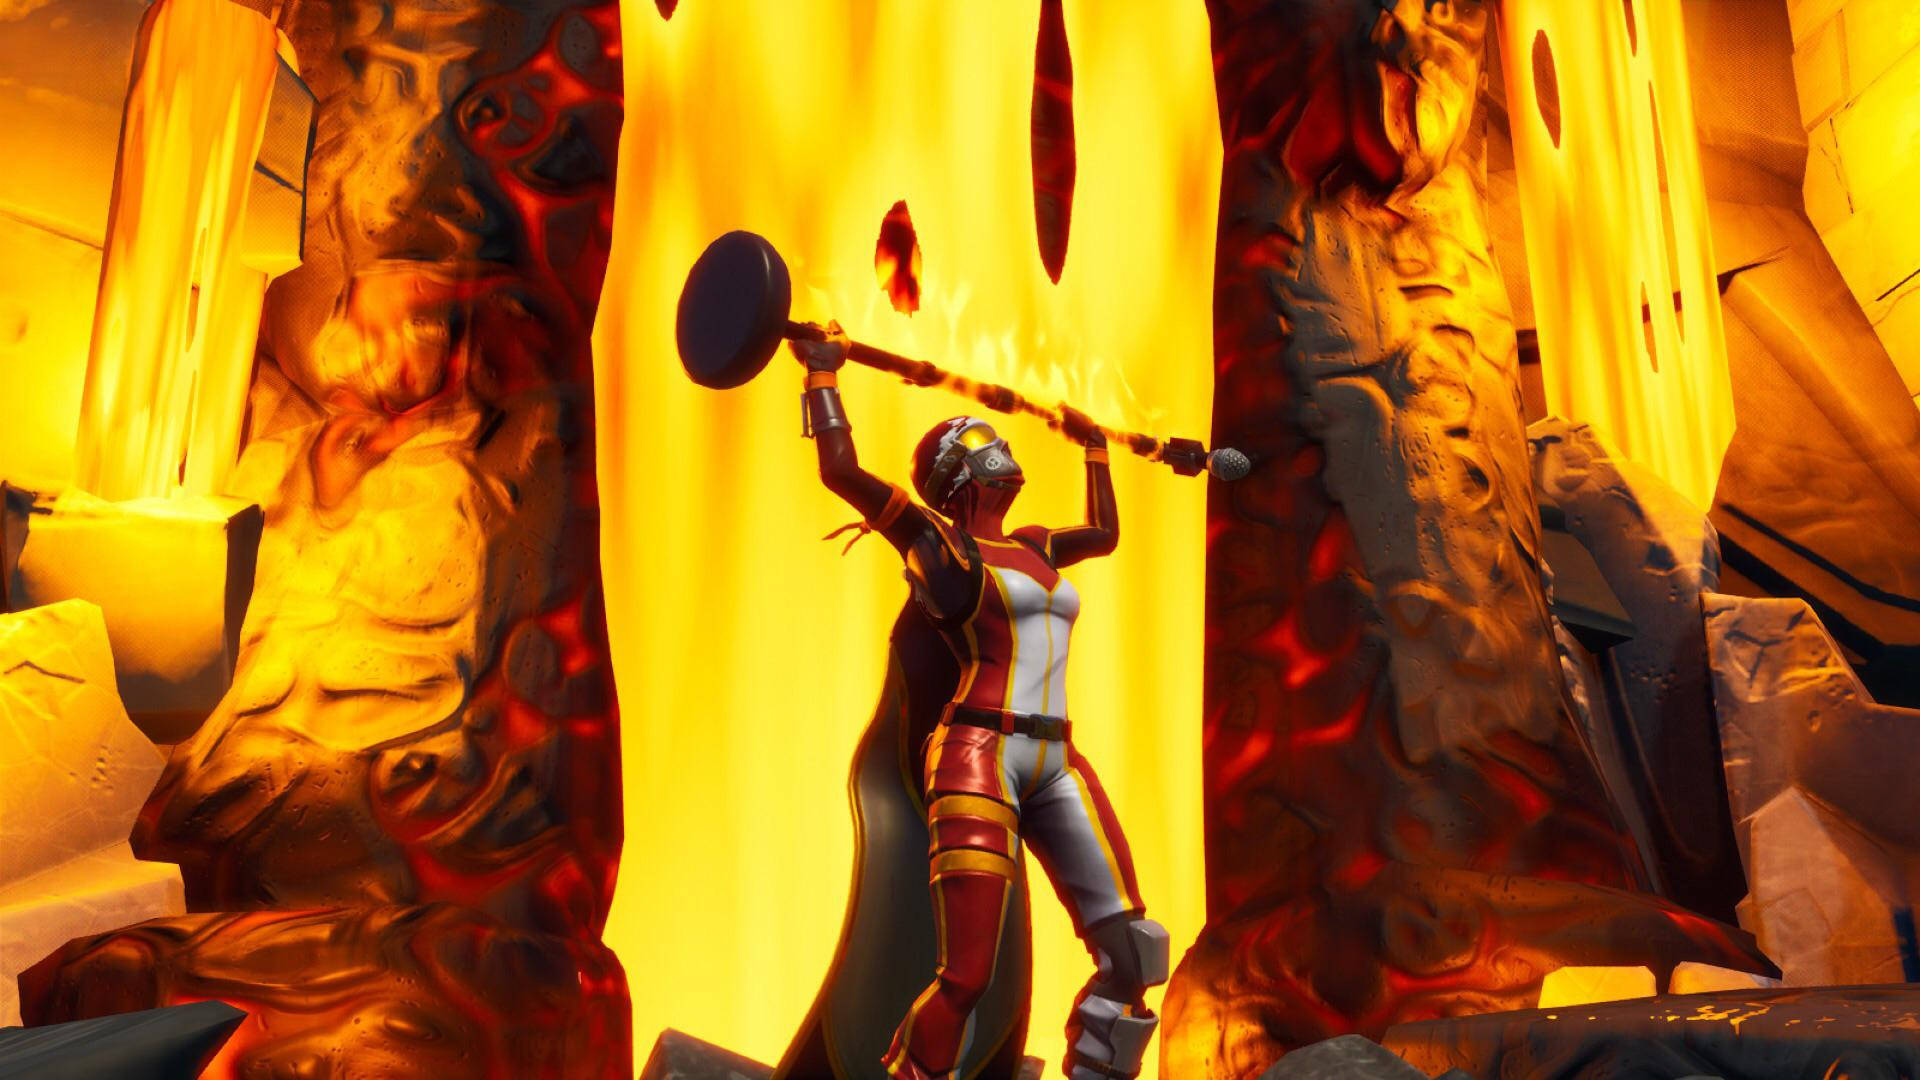 Mogul Master Skier In The Flames Wallpaper